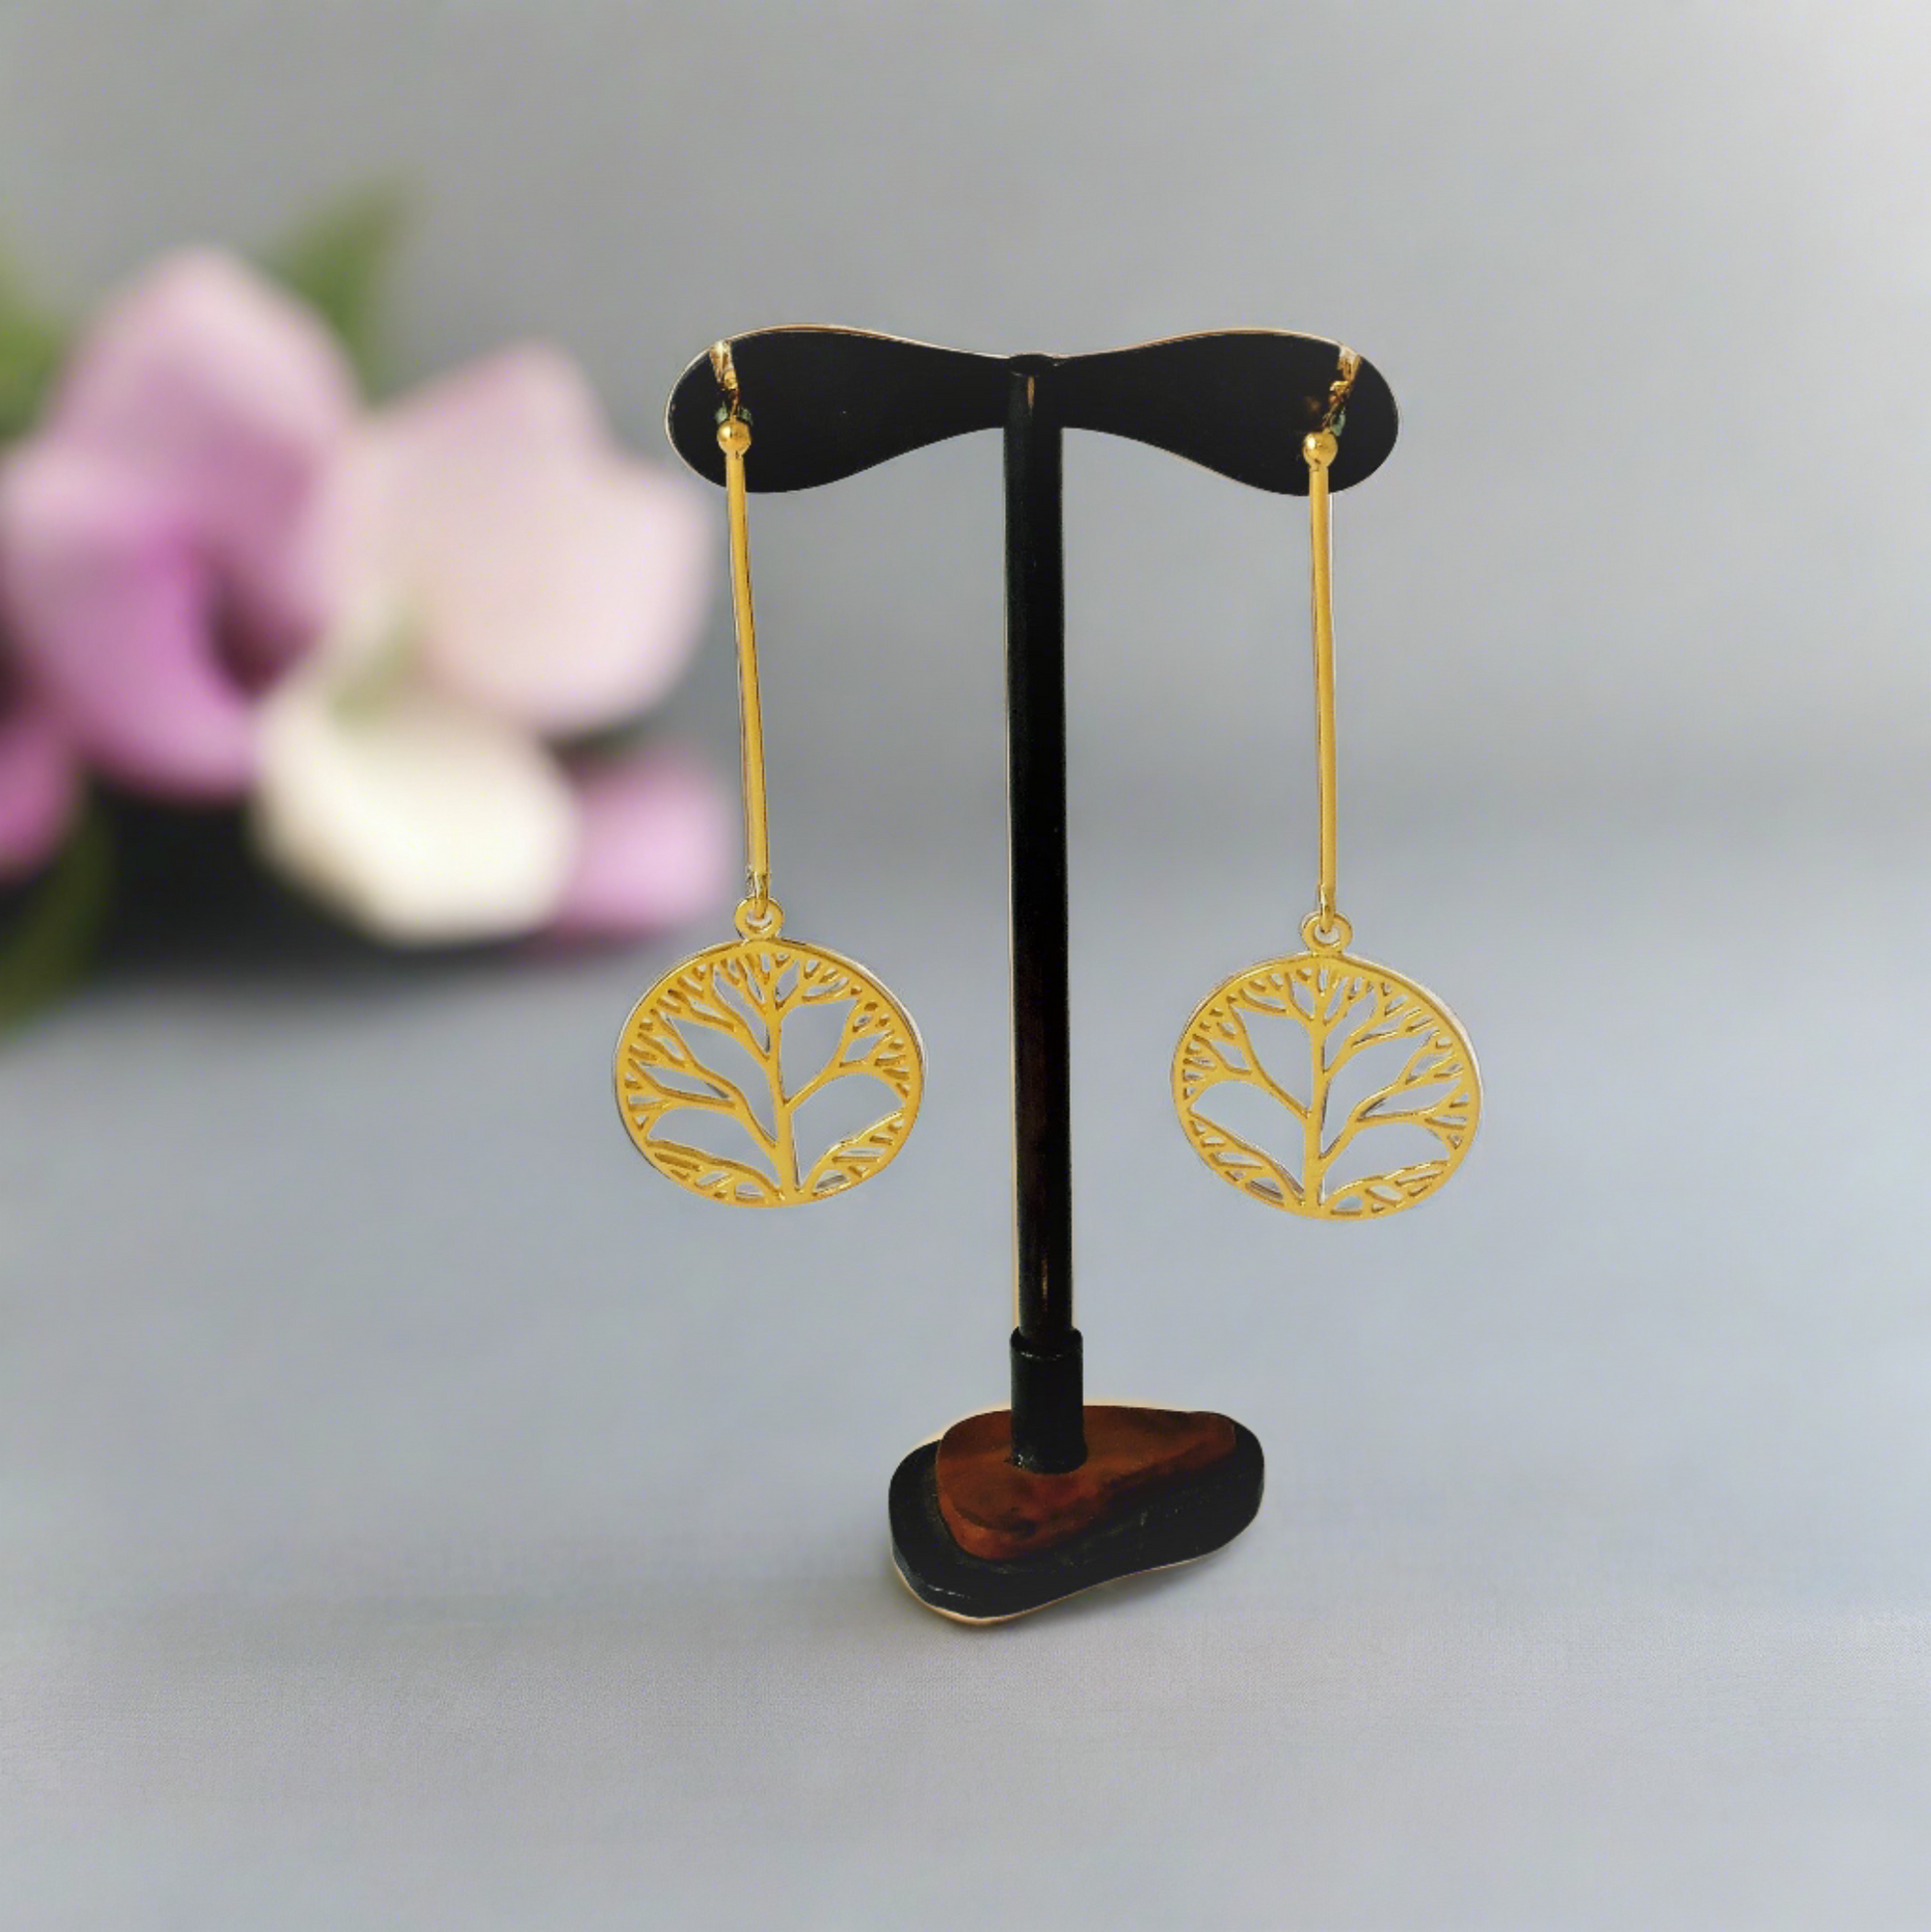 Tree of life long earrings in a stand . Earrings made of silver, gold-plated, long with thick wire, and beneath the wire hangs a round design with the tree . The design is very elegant.”